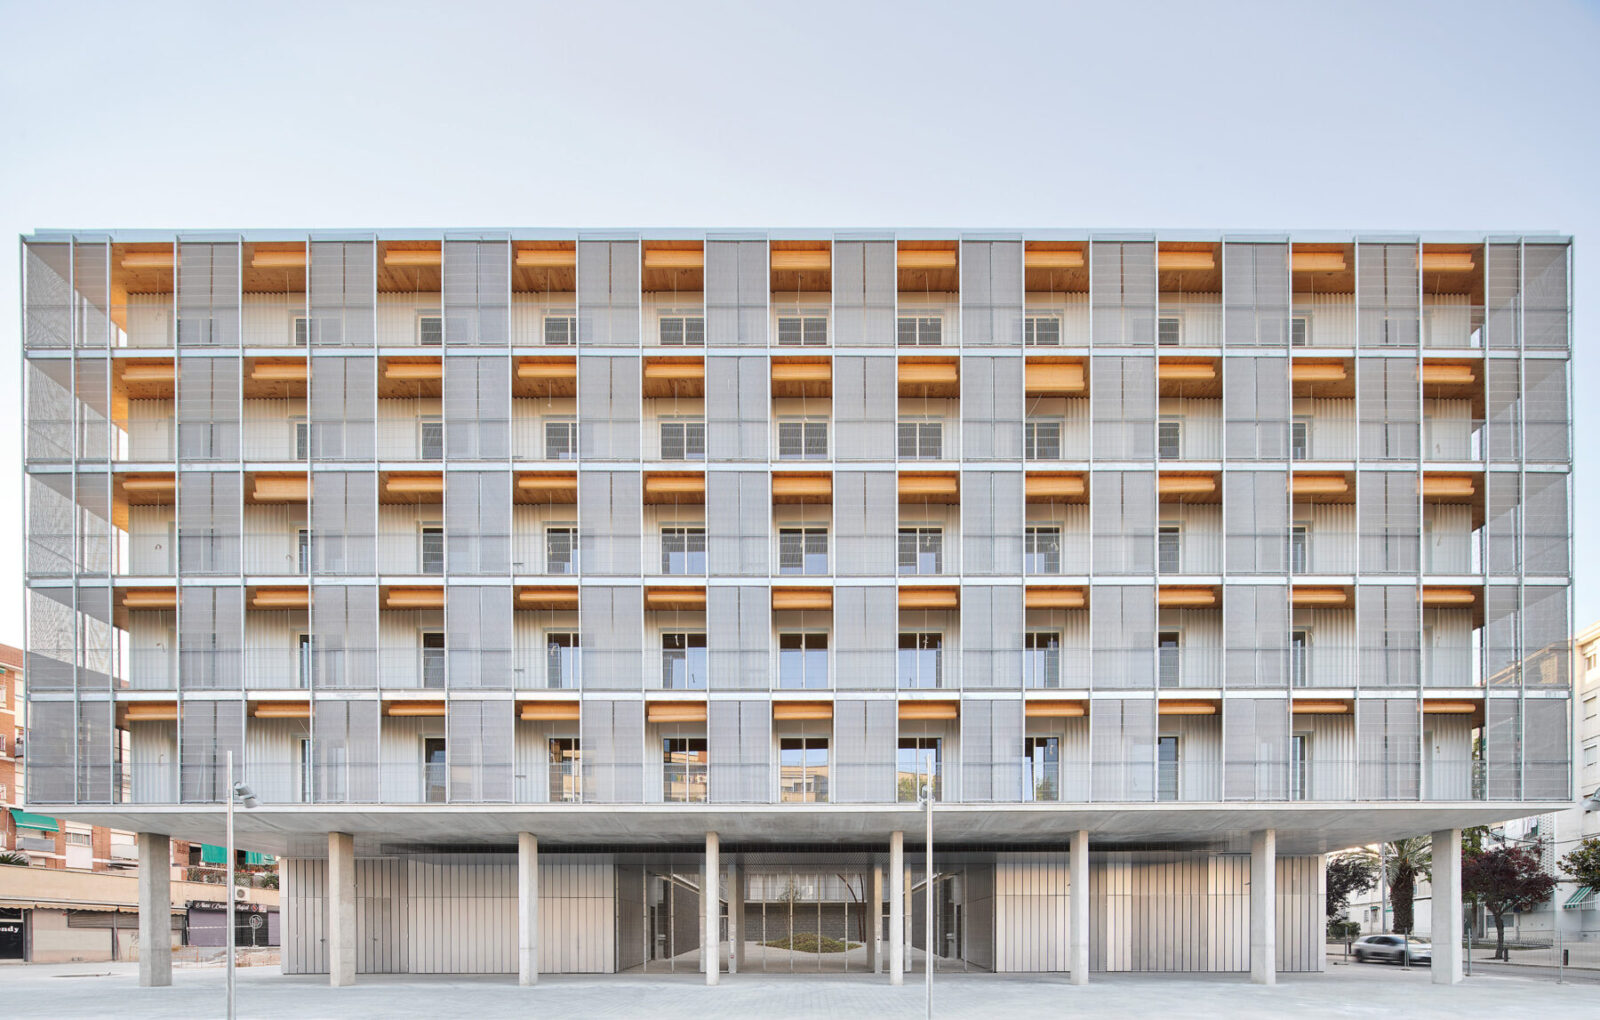 Archisearch 85 Social Housing Units: the largest wooden-structured residential building in Spain by Peris+Toral Arquitectes is among the 7 finalists for the 2022 EU Prize for Contemporary Architecture - Mies Van Der Rohe Award